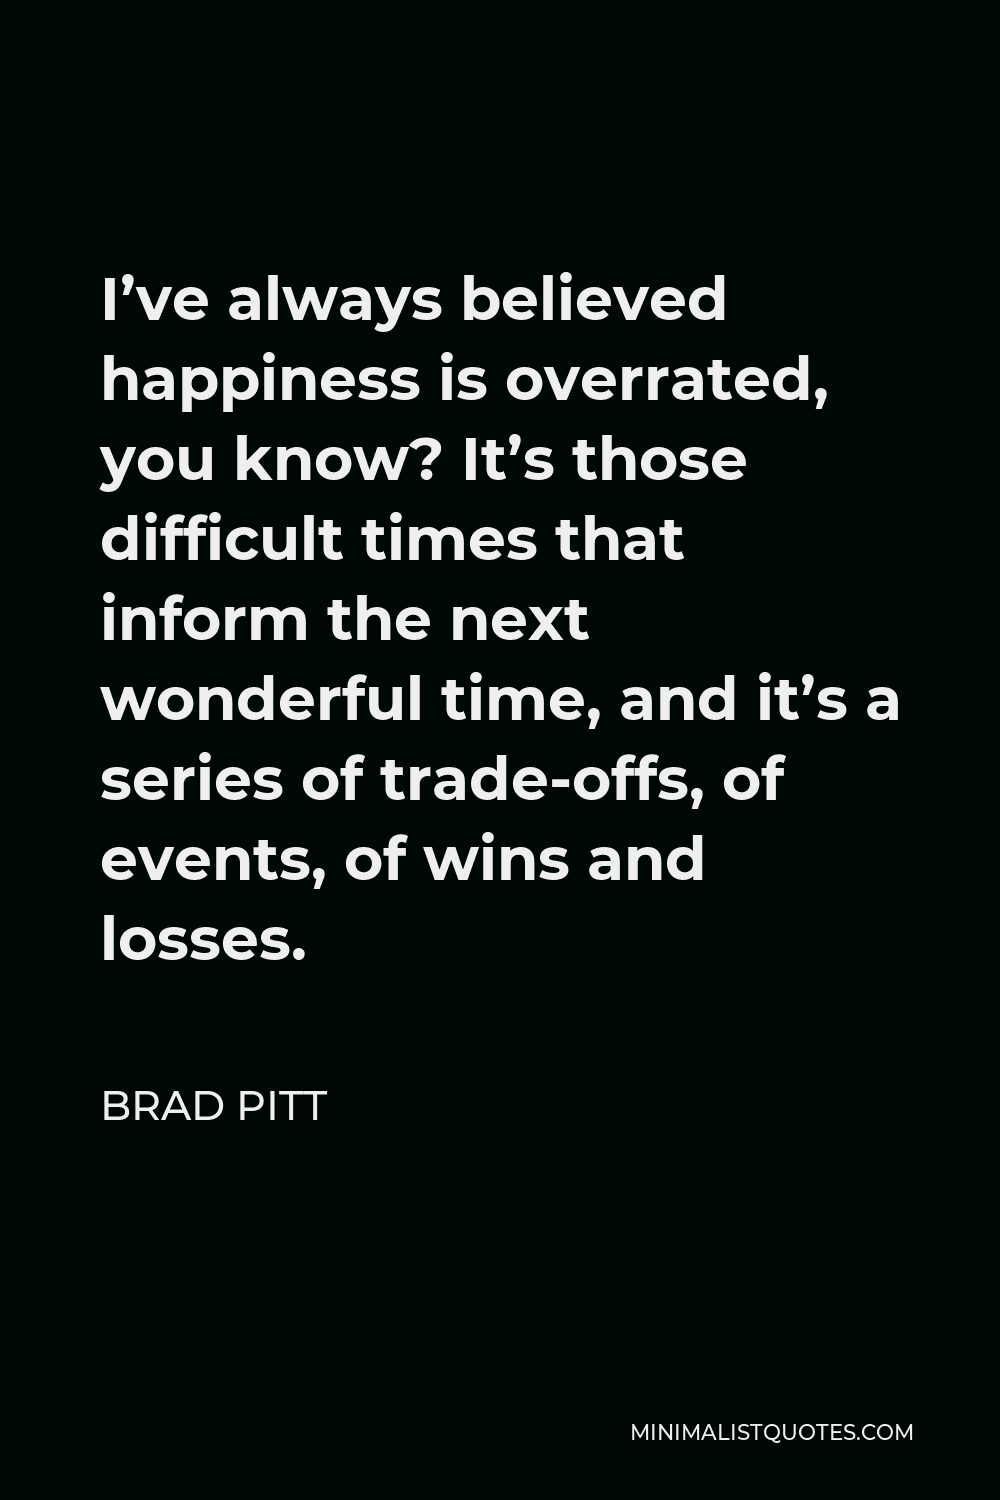 Brad Pitt Quote - I’ve always believed happiness is overrated, you know? It’s those difficult times that inform the next wonderful time, and it’s a series of trade-offs, of events, of wins and losses.